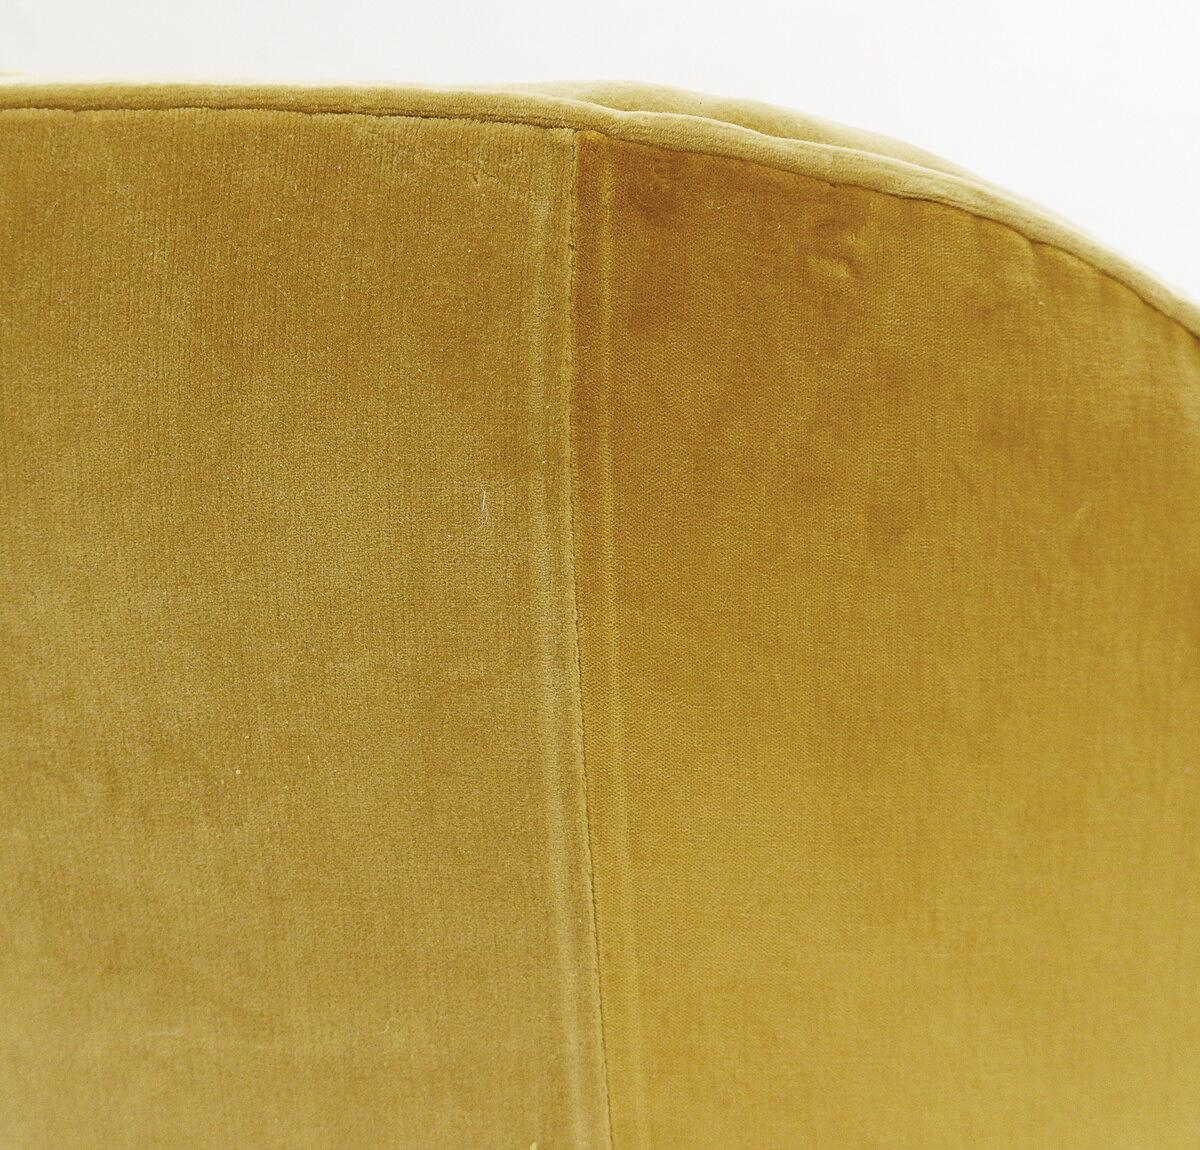 Midcentury Pair of Velvet Armchairs in the Style of Gio Ponti For Sale 3